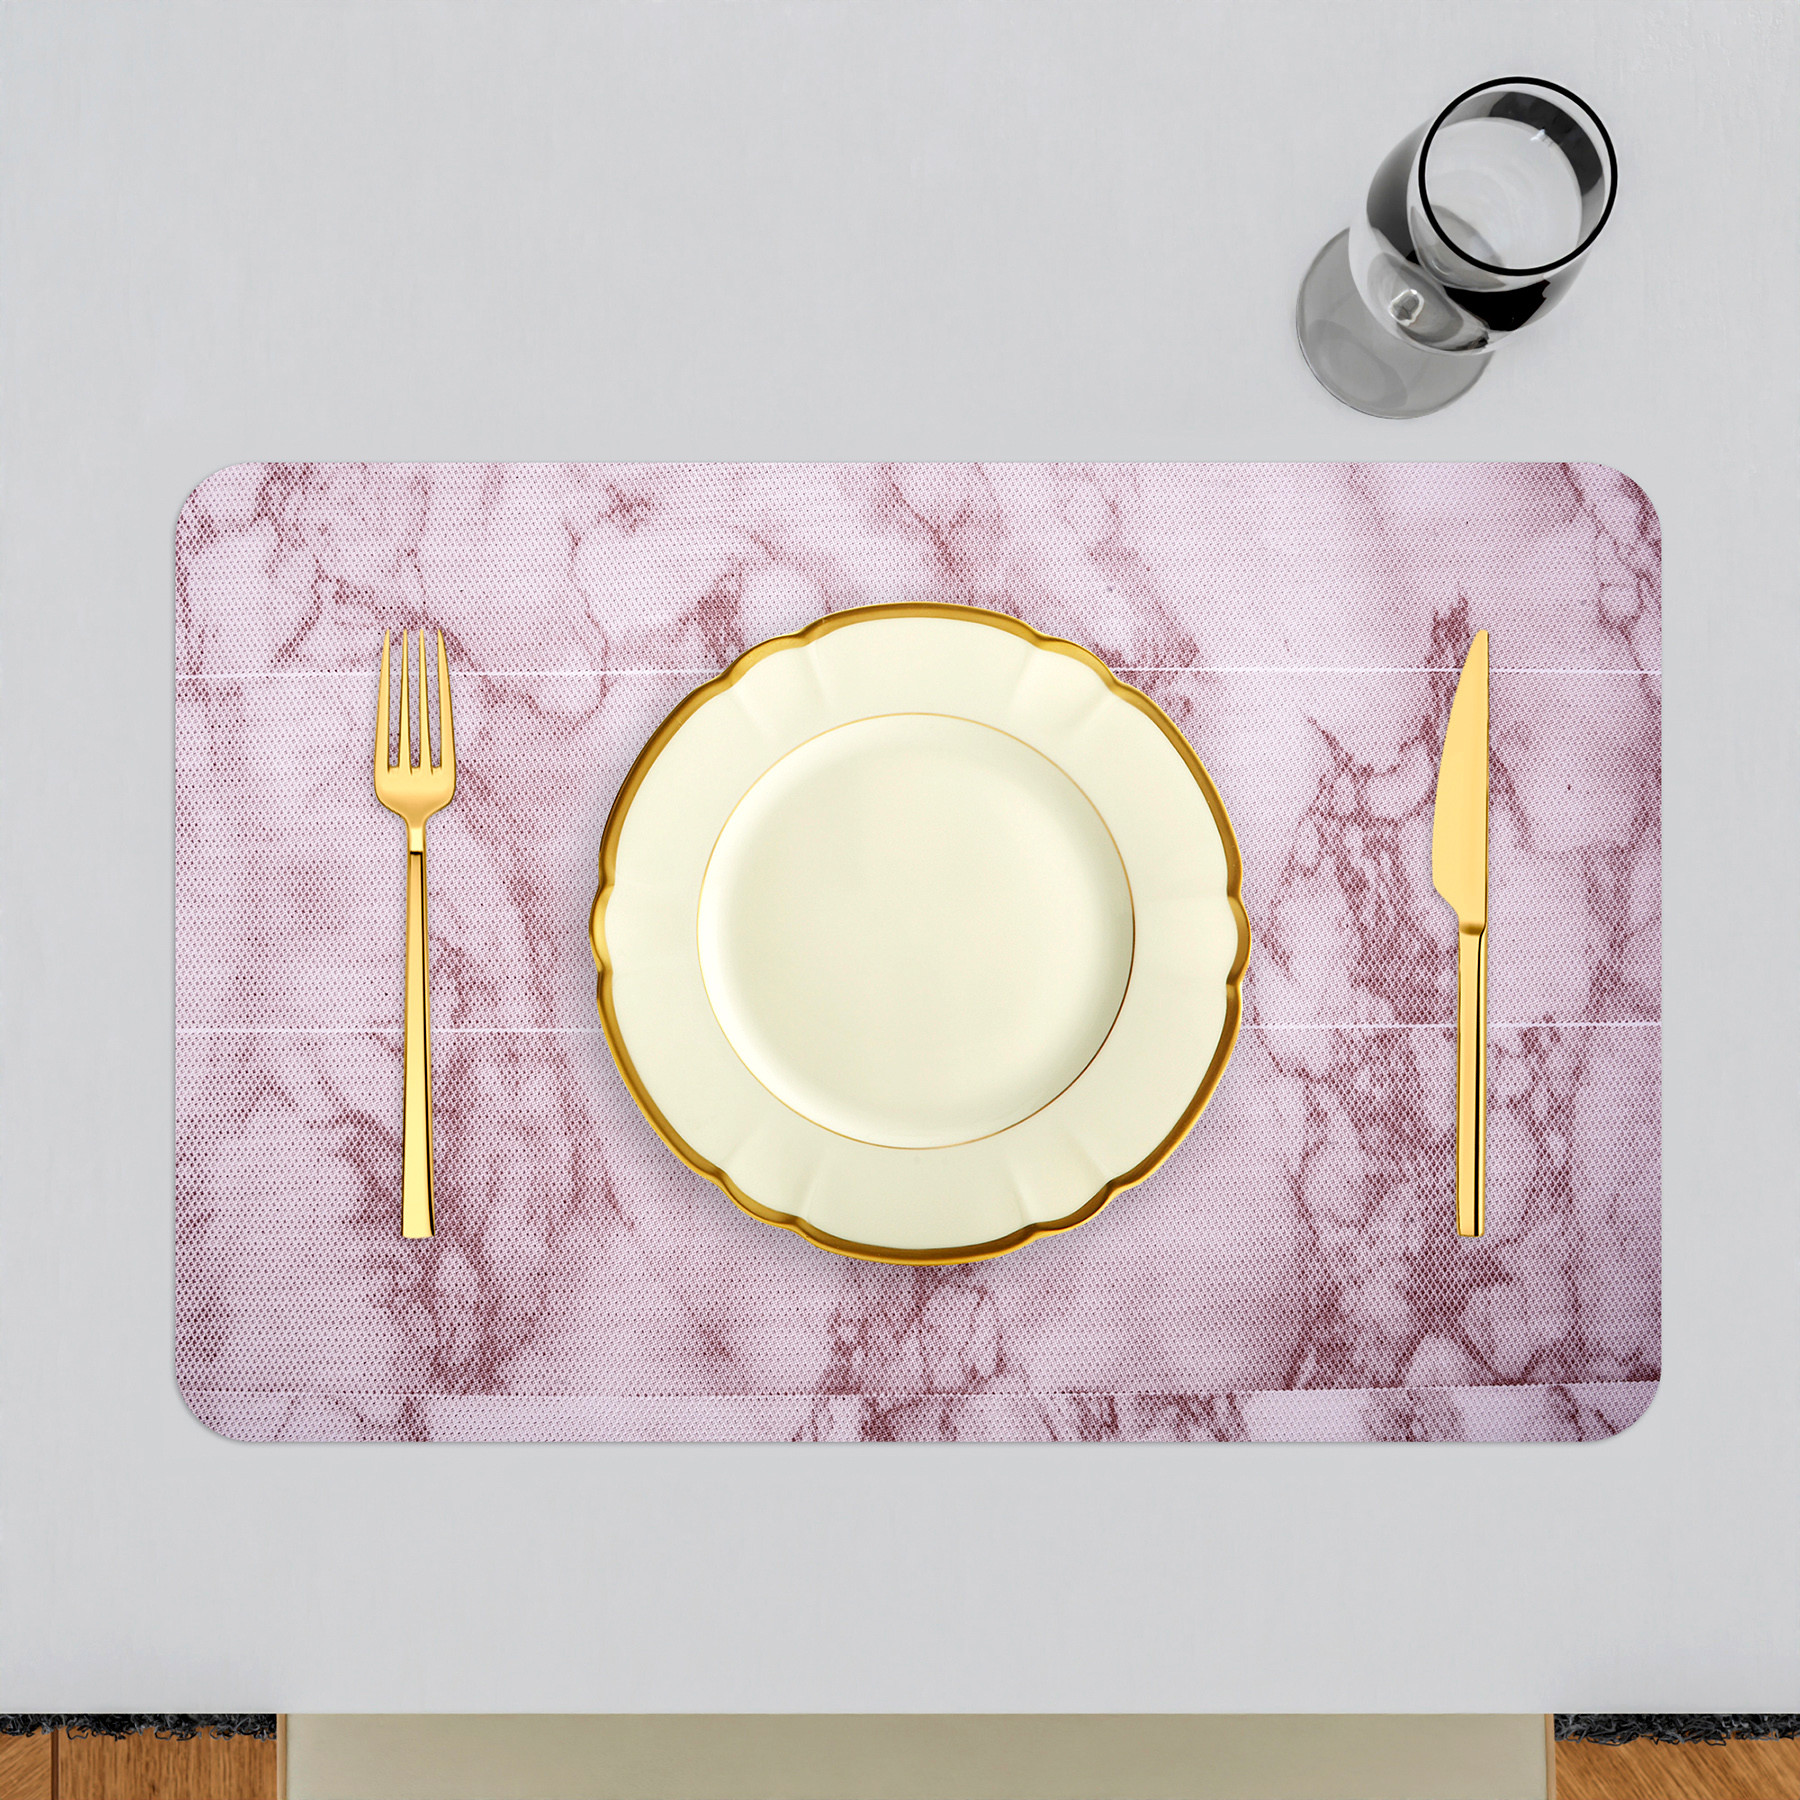 Kuber Industries Placemat | Placemats for Dining Room | Anti-Slip Table Mat Set | Placemats for Kitchen Table | Dining Table Placemats | Marble Placemat | 6 Piece Set | Pink